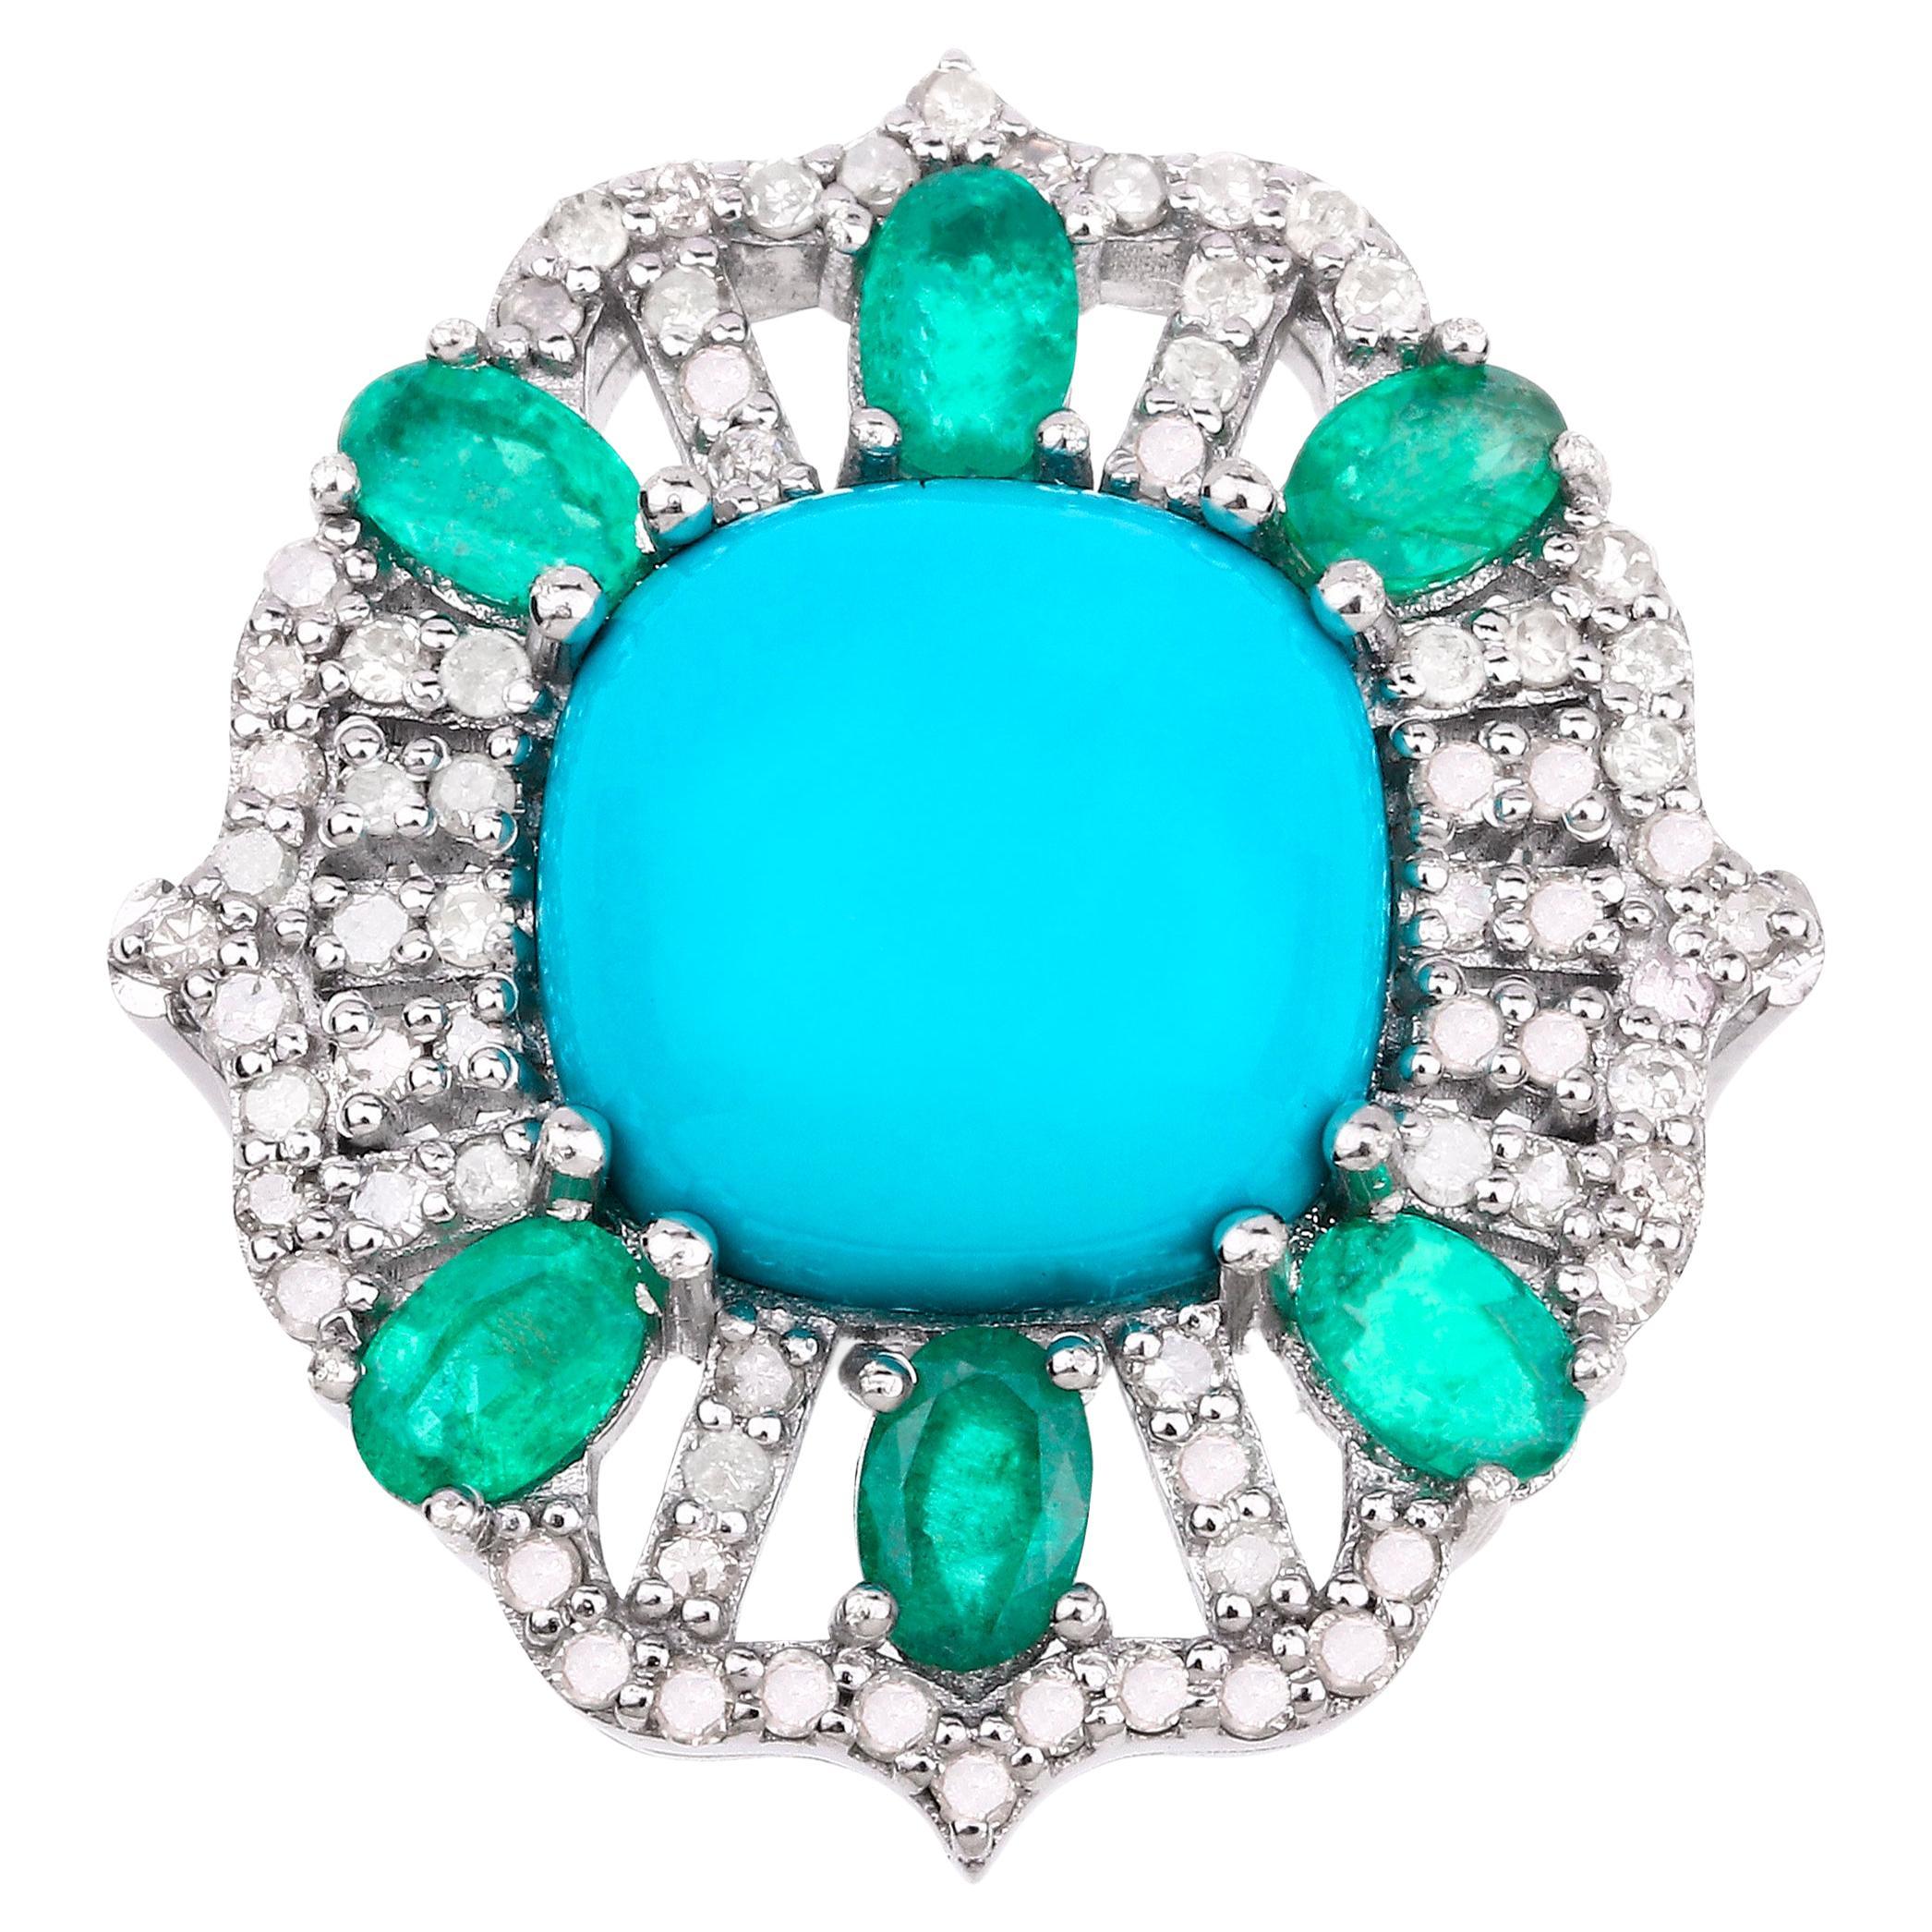  Turquoise Ring With Emeralds and Diamonds 7.70 Carats